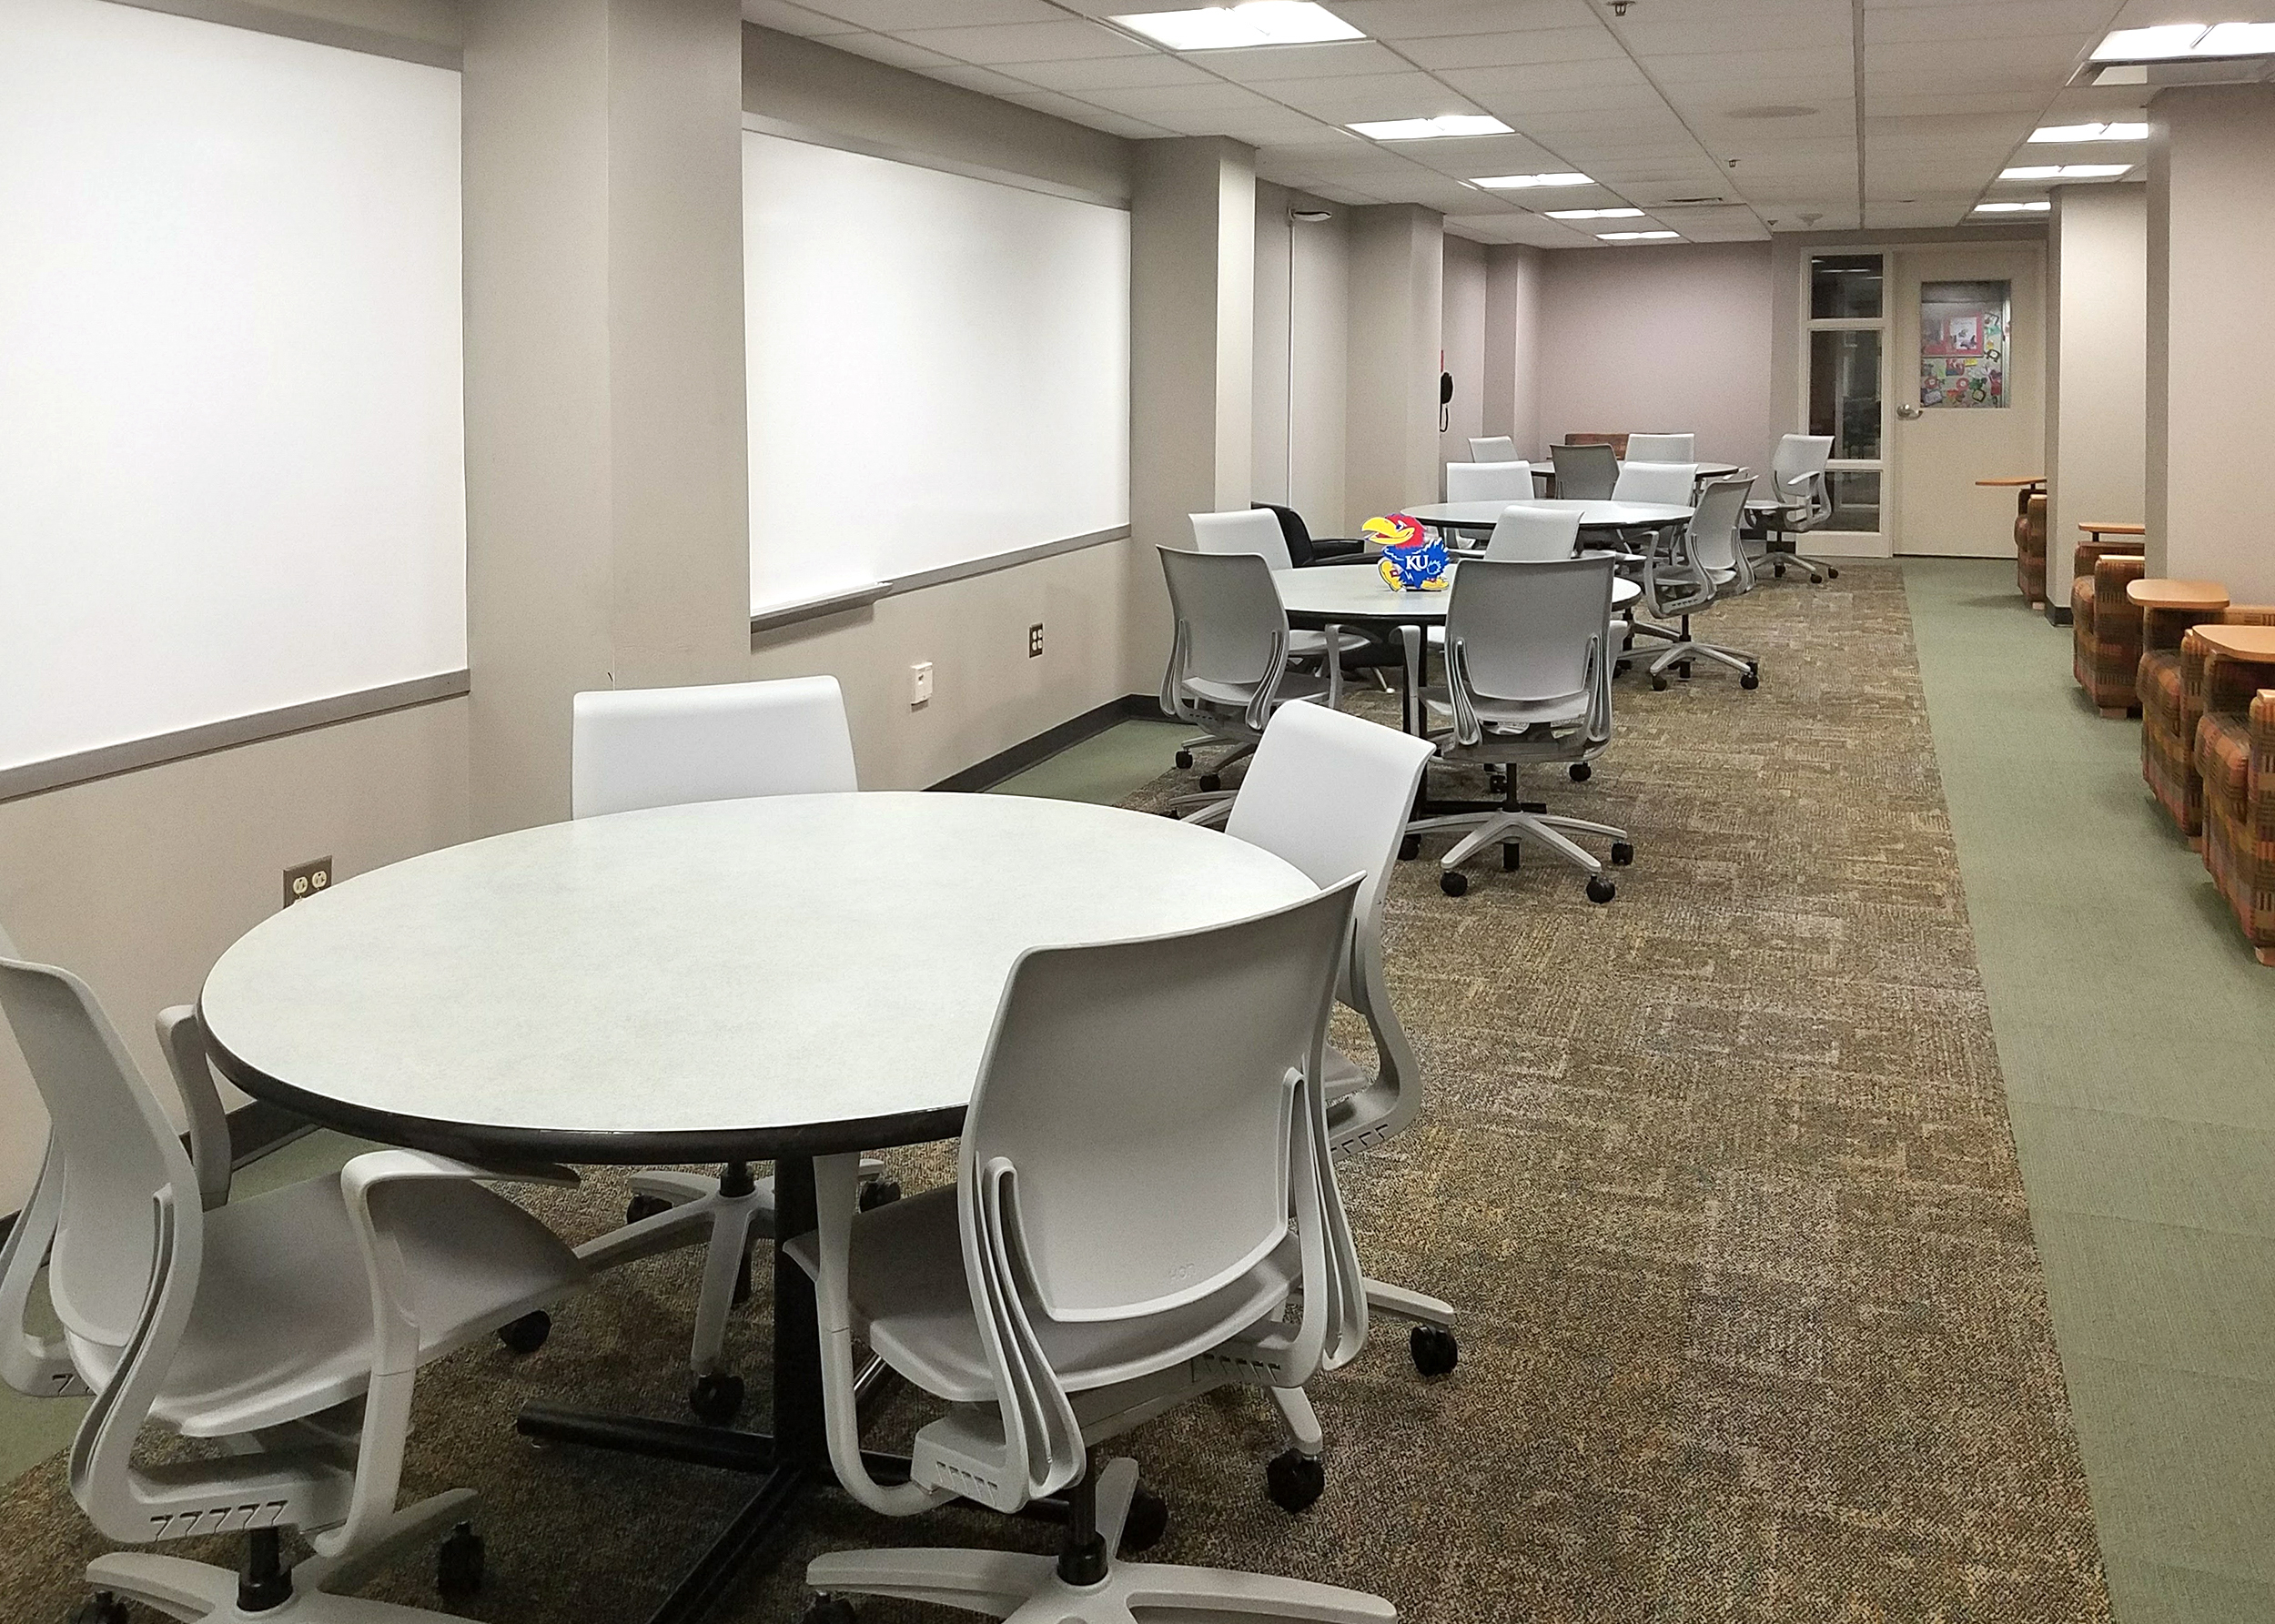 A large room with several round tables and chairs positioned in front of white boards.